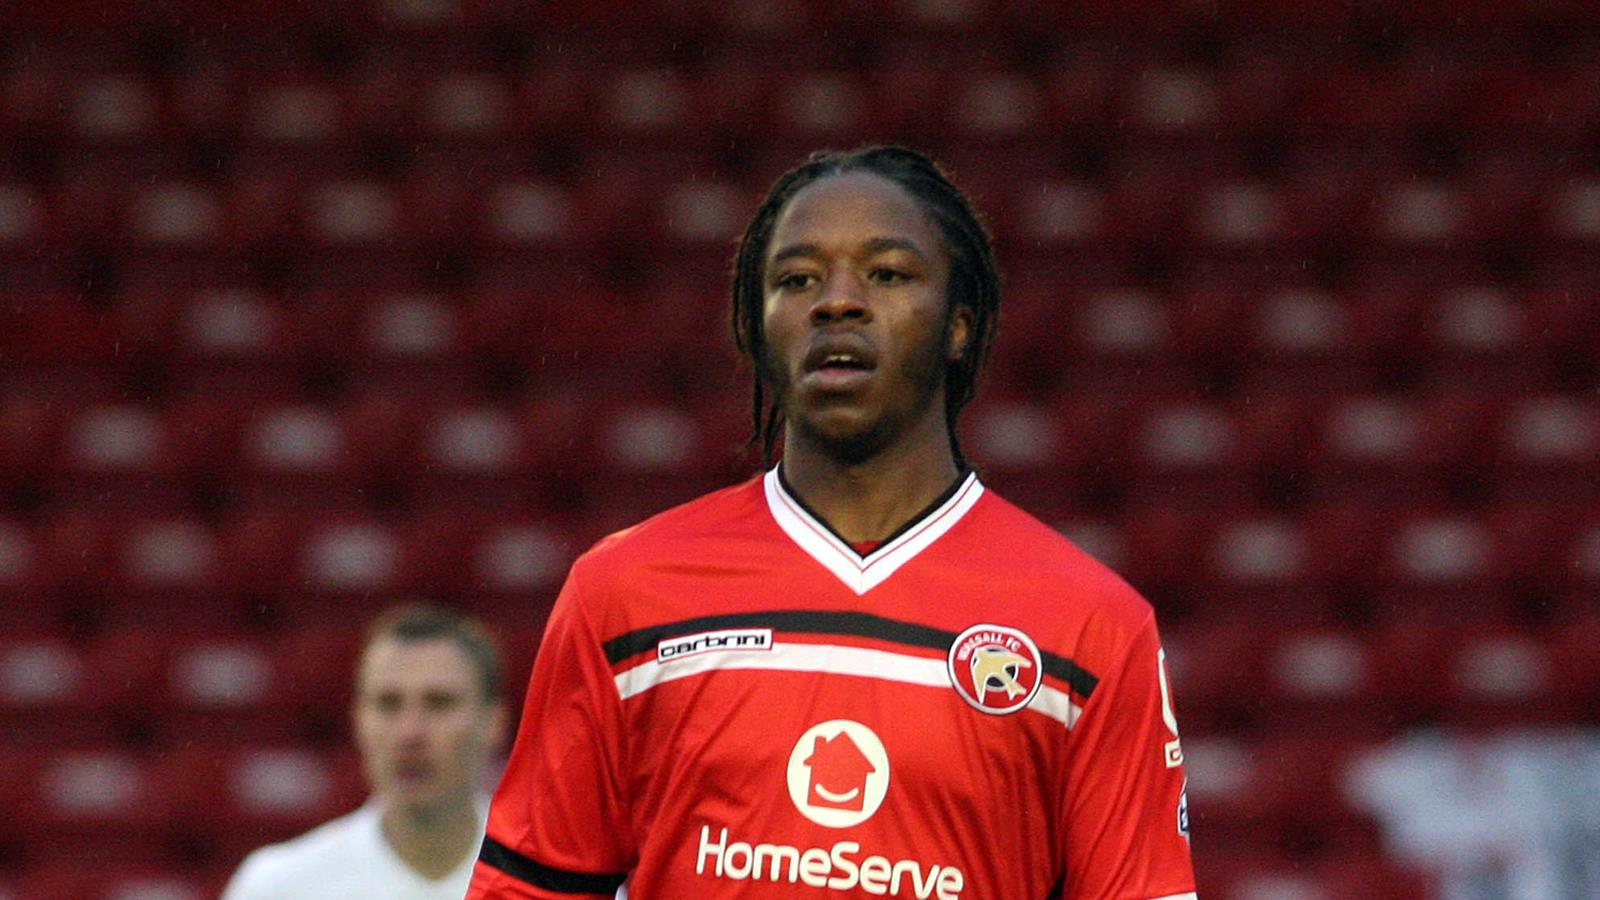 SAWYERS JOINS BRENTFORD - News - Walsall FC